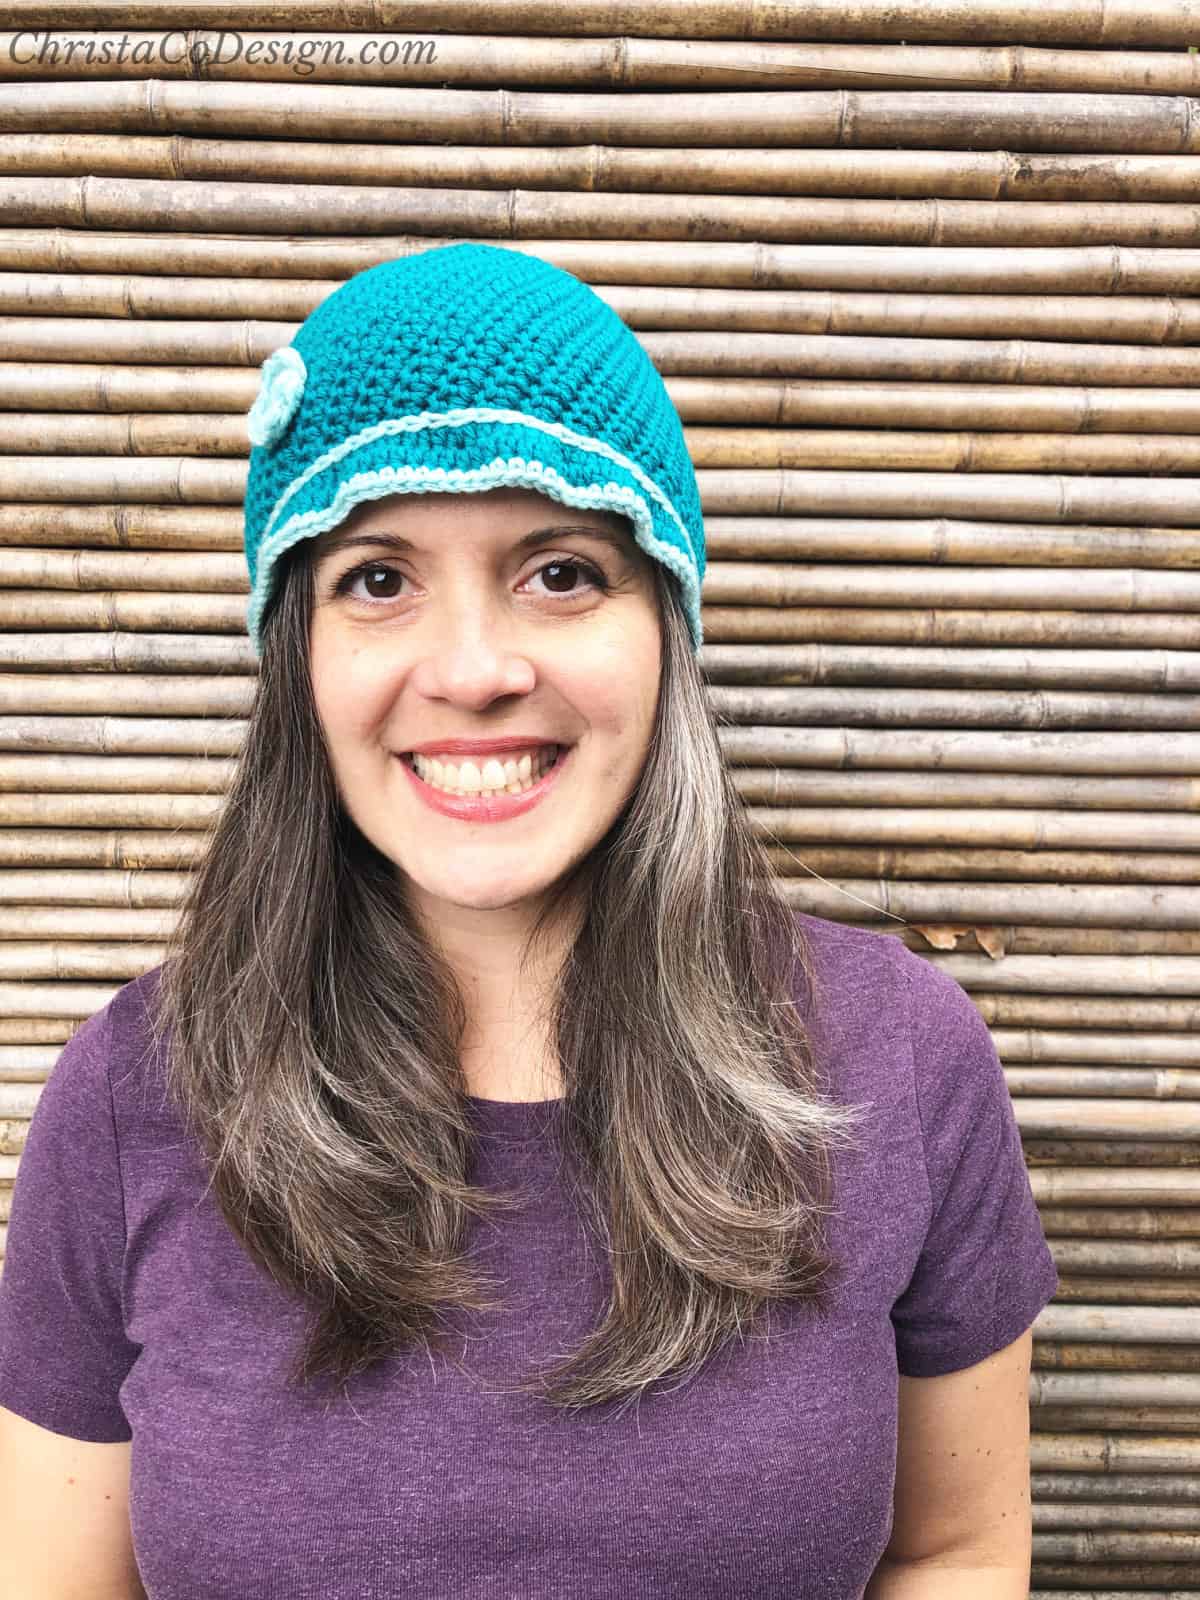 Woman smiling with crochet cloche hat in blue over long brown hair.